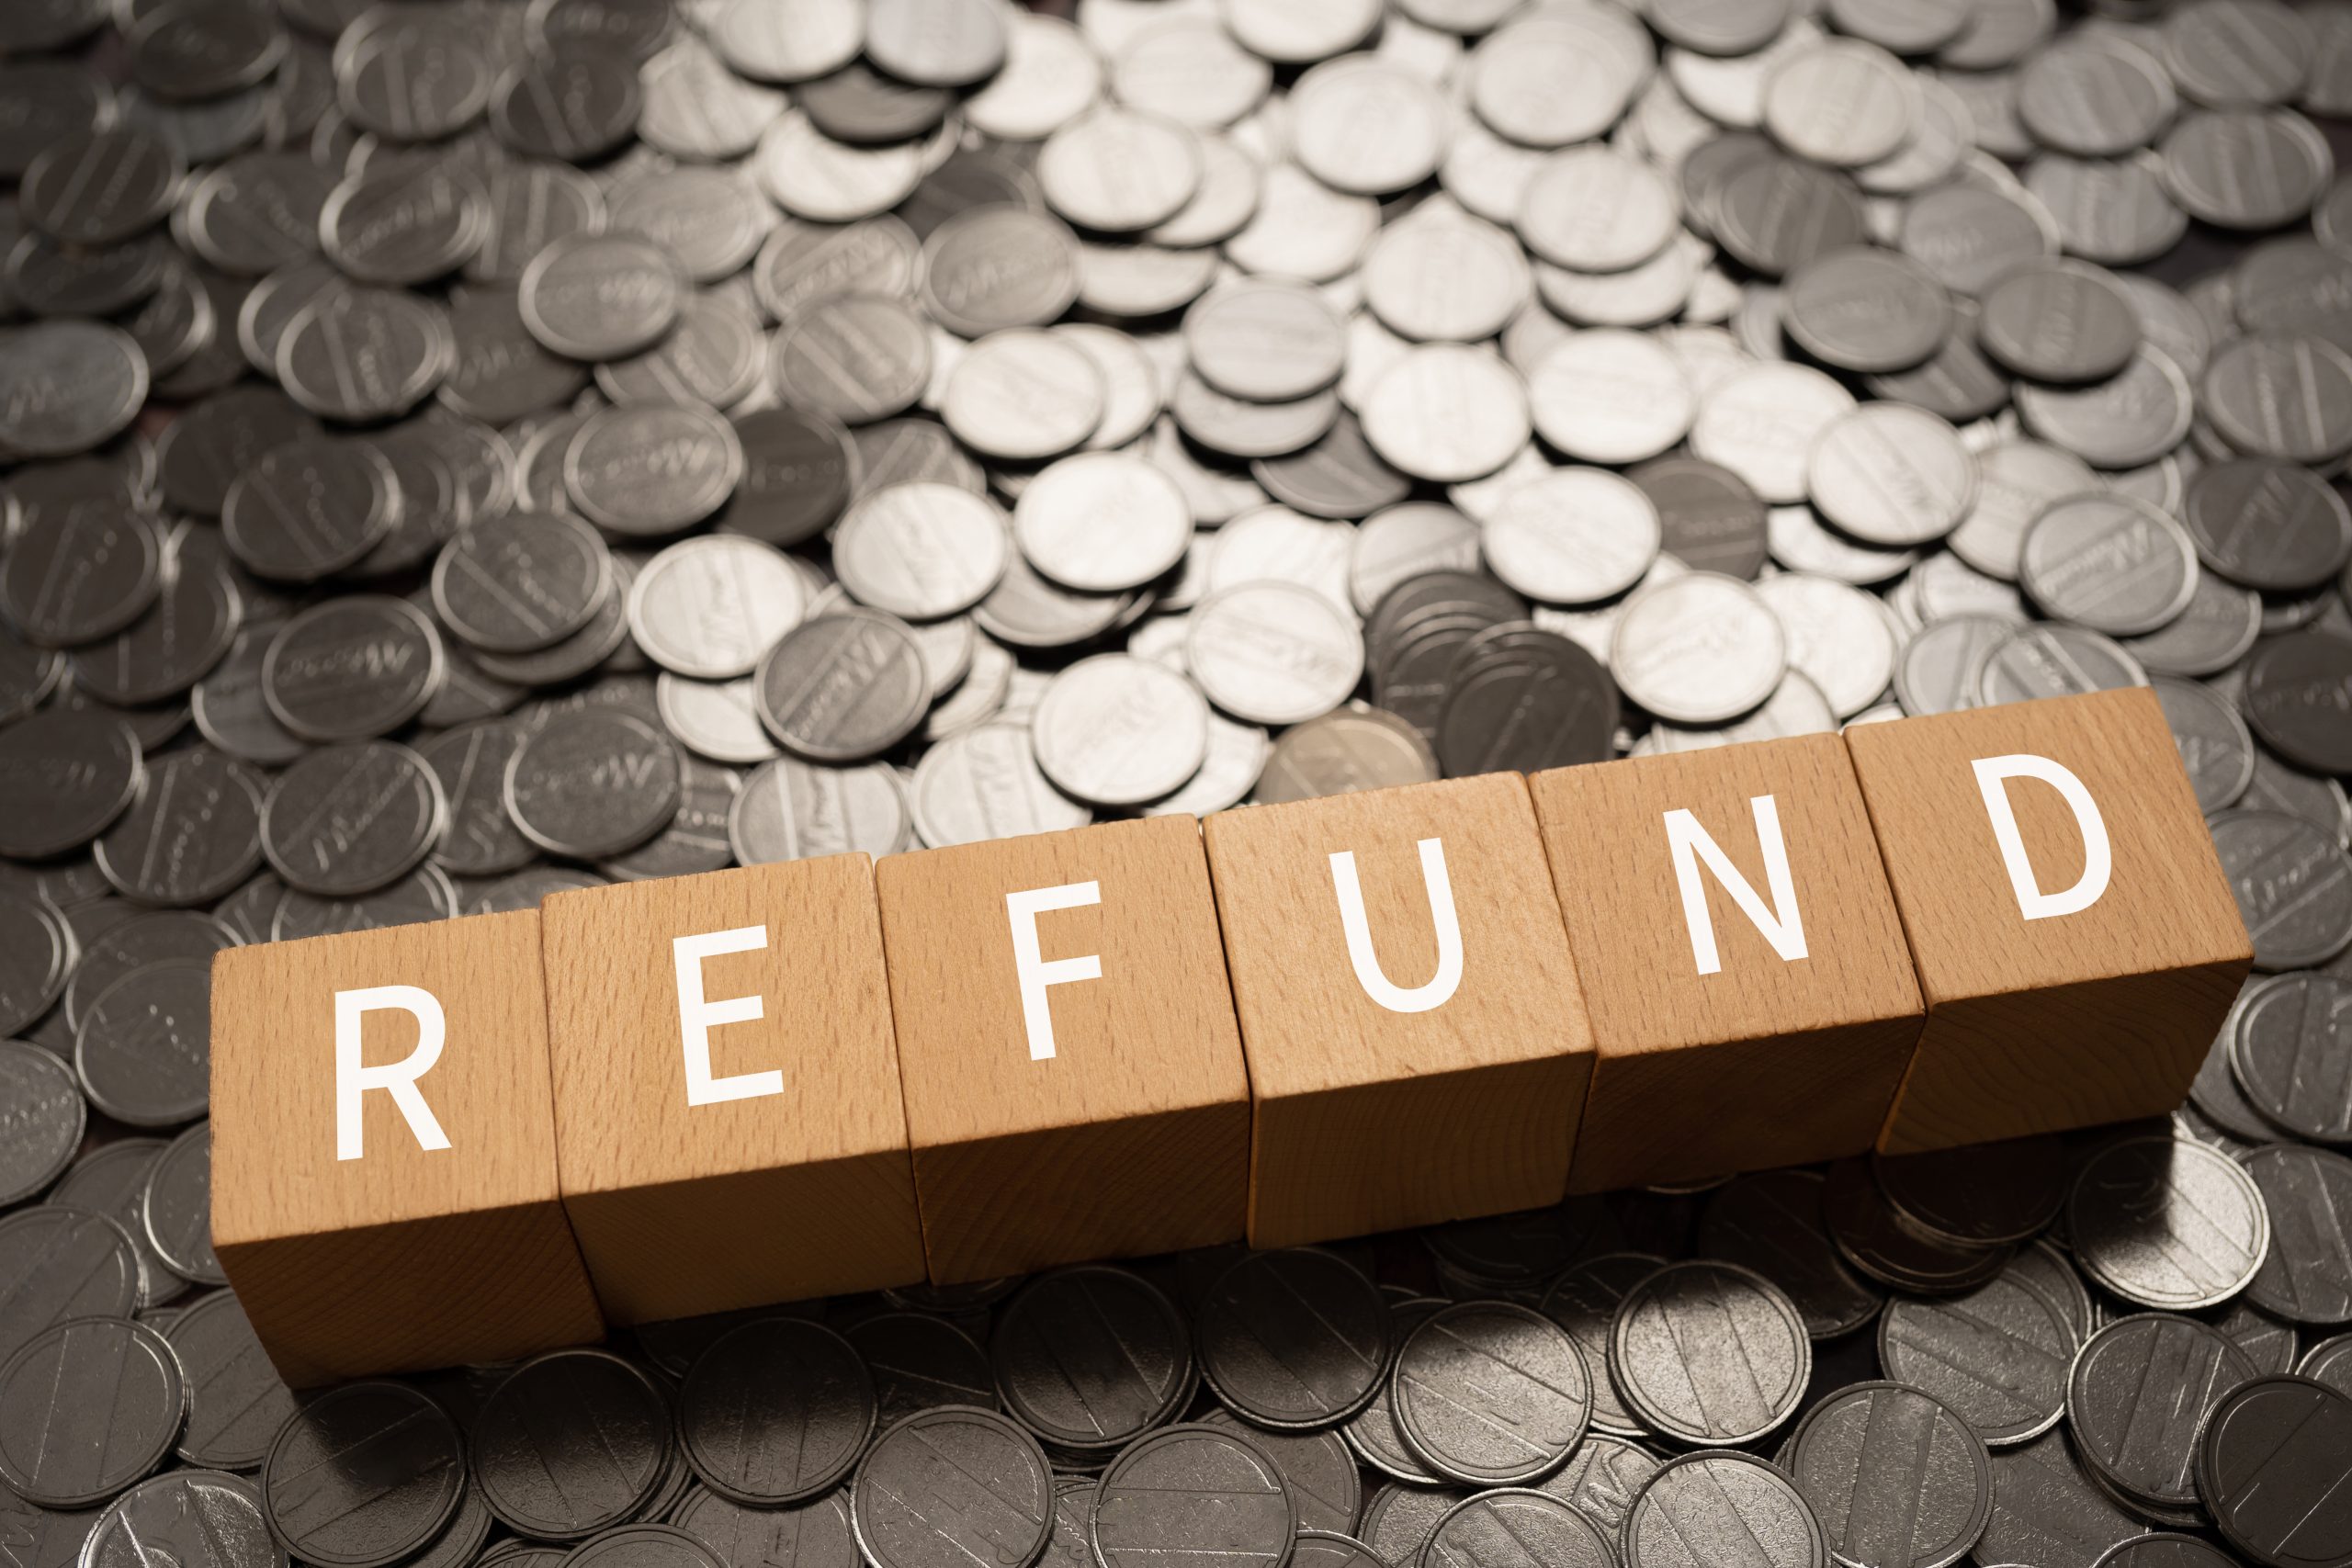 Wooden blocks with "REFUND" text of concept and coins.